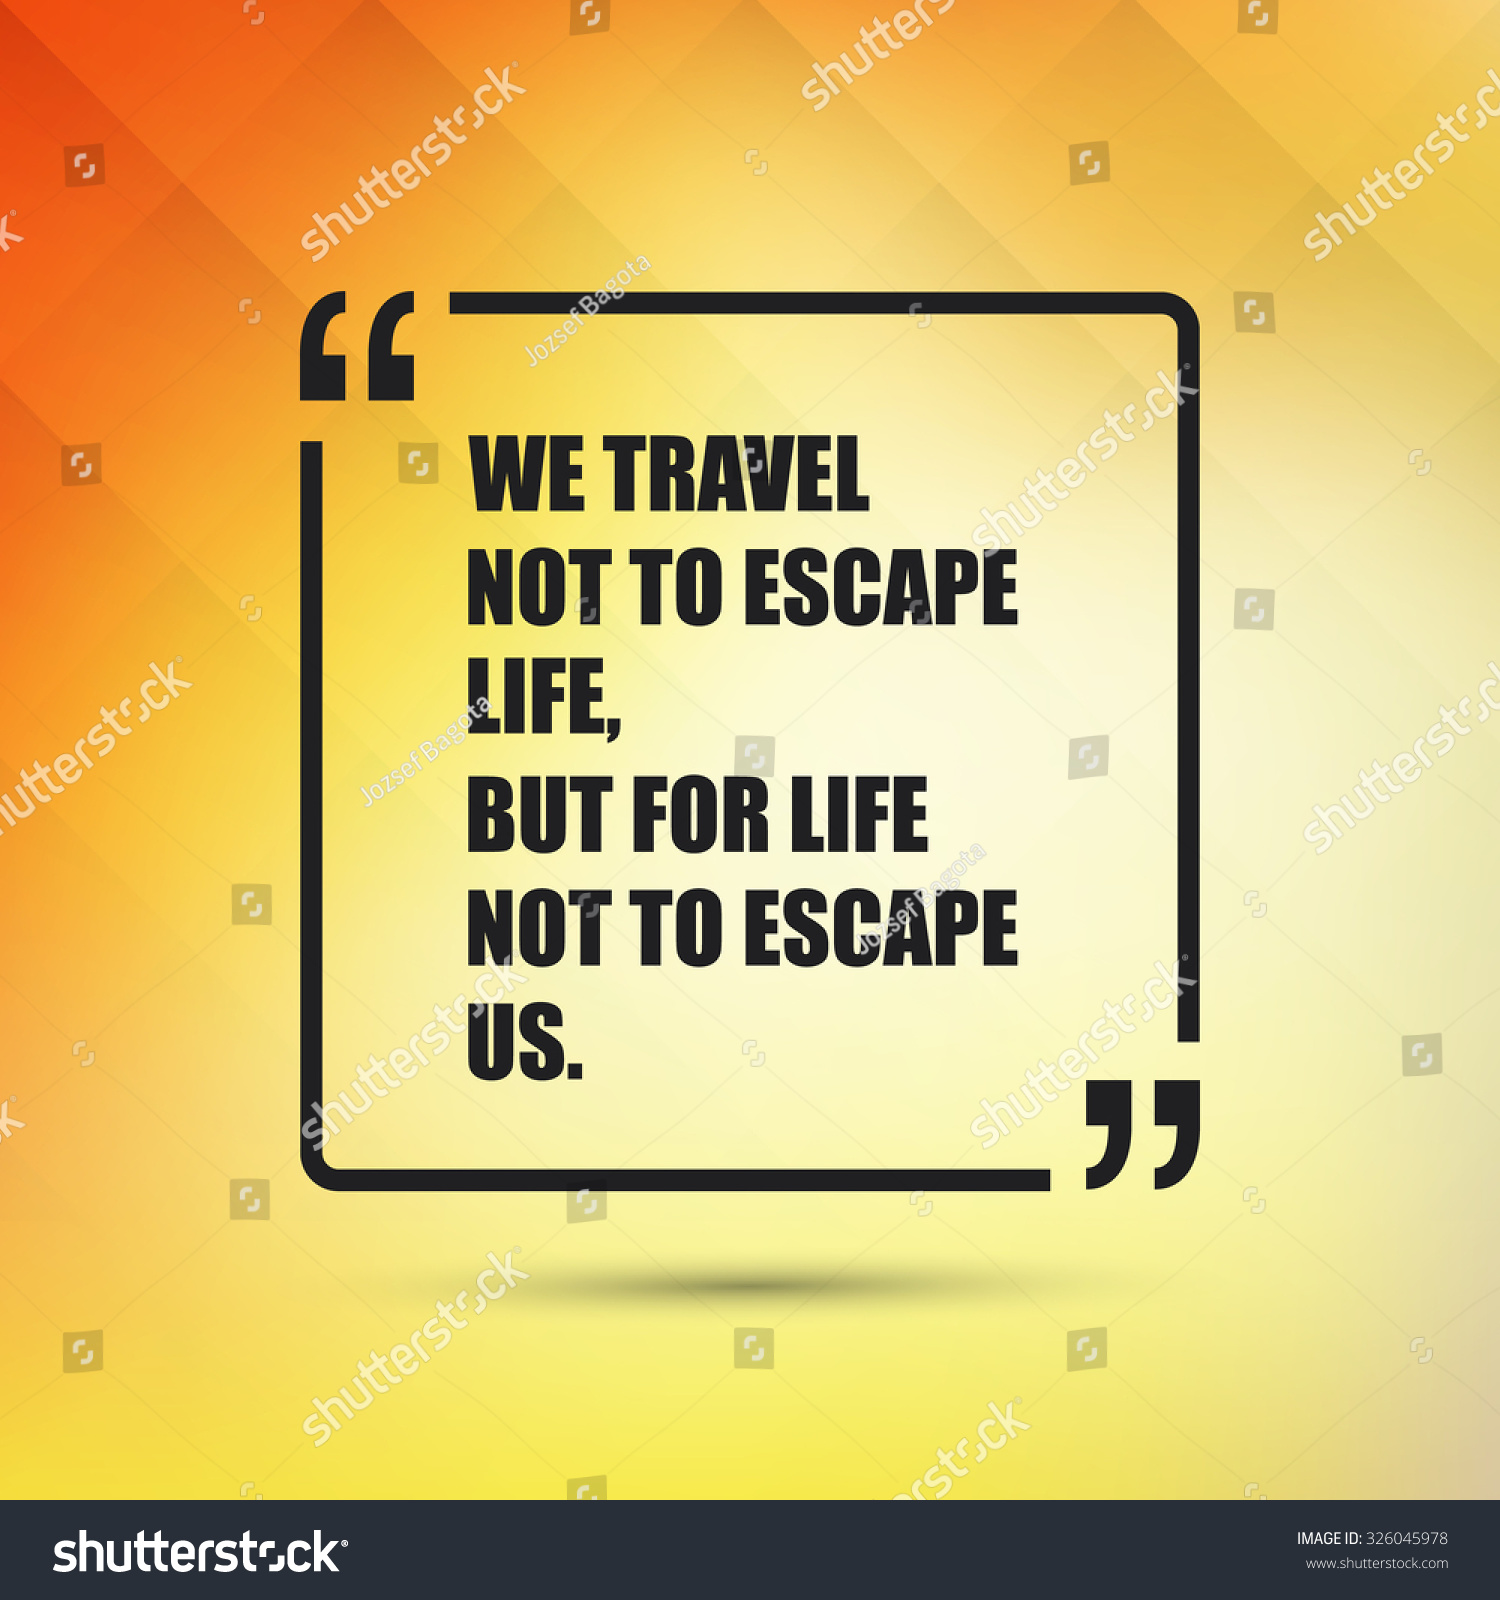 We Travel Not To Escape Life, But For Life Not To Escape ...